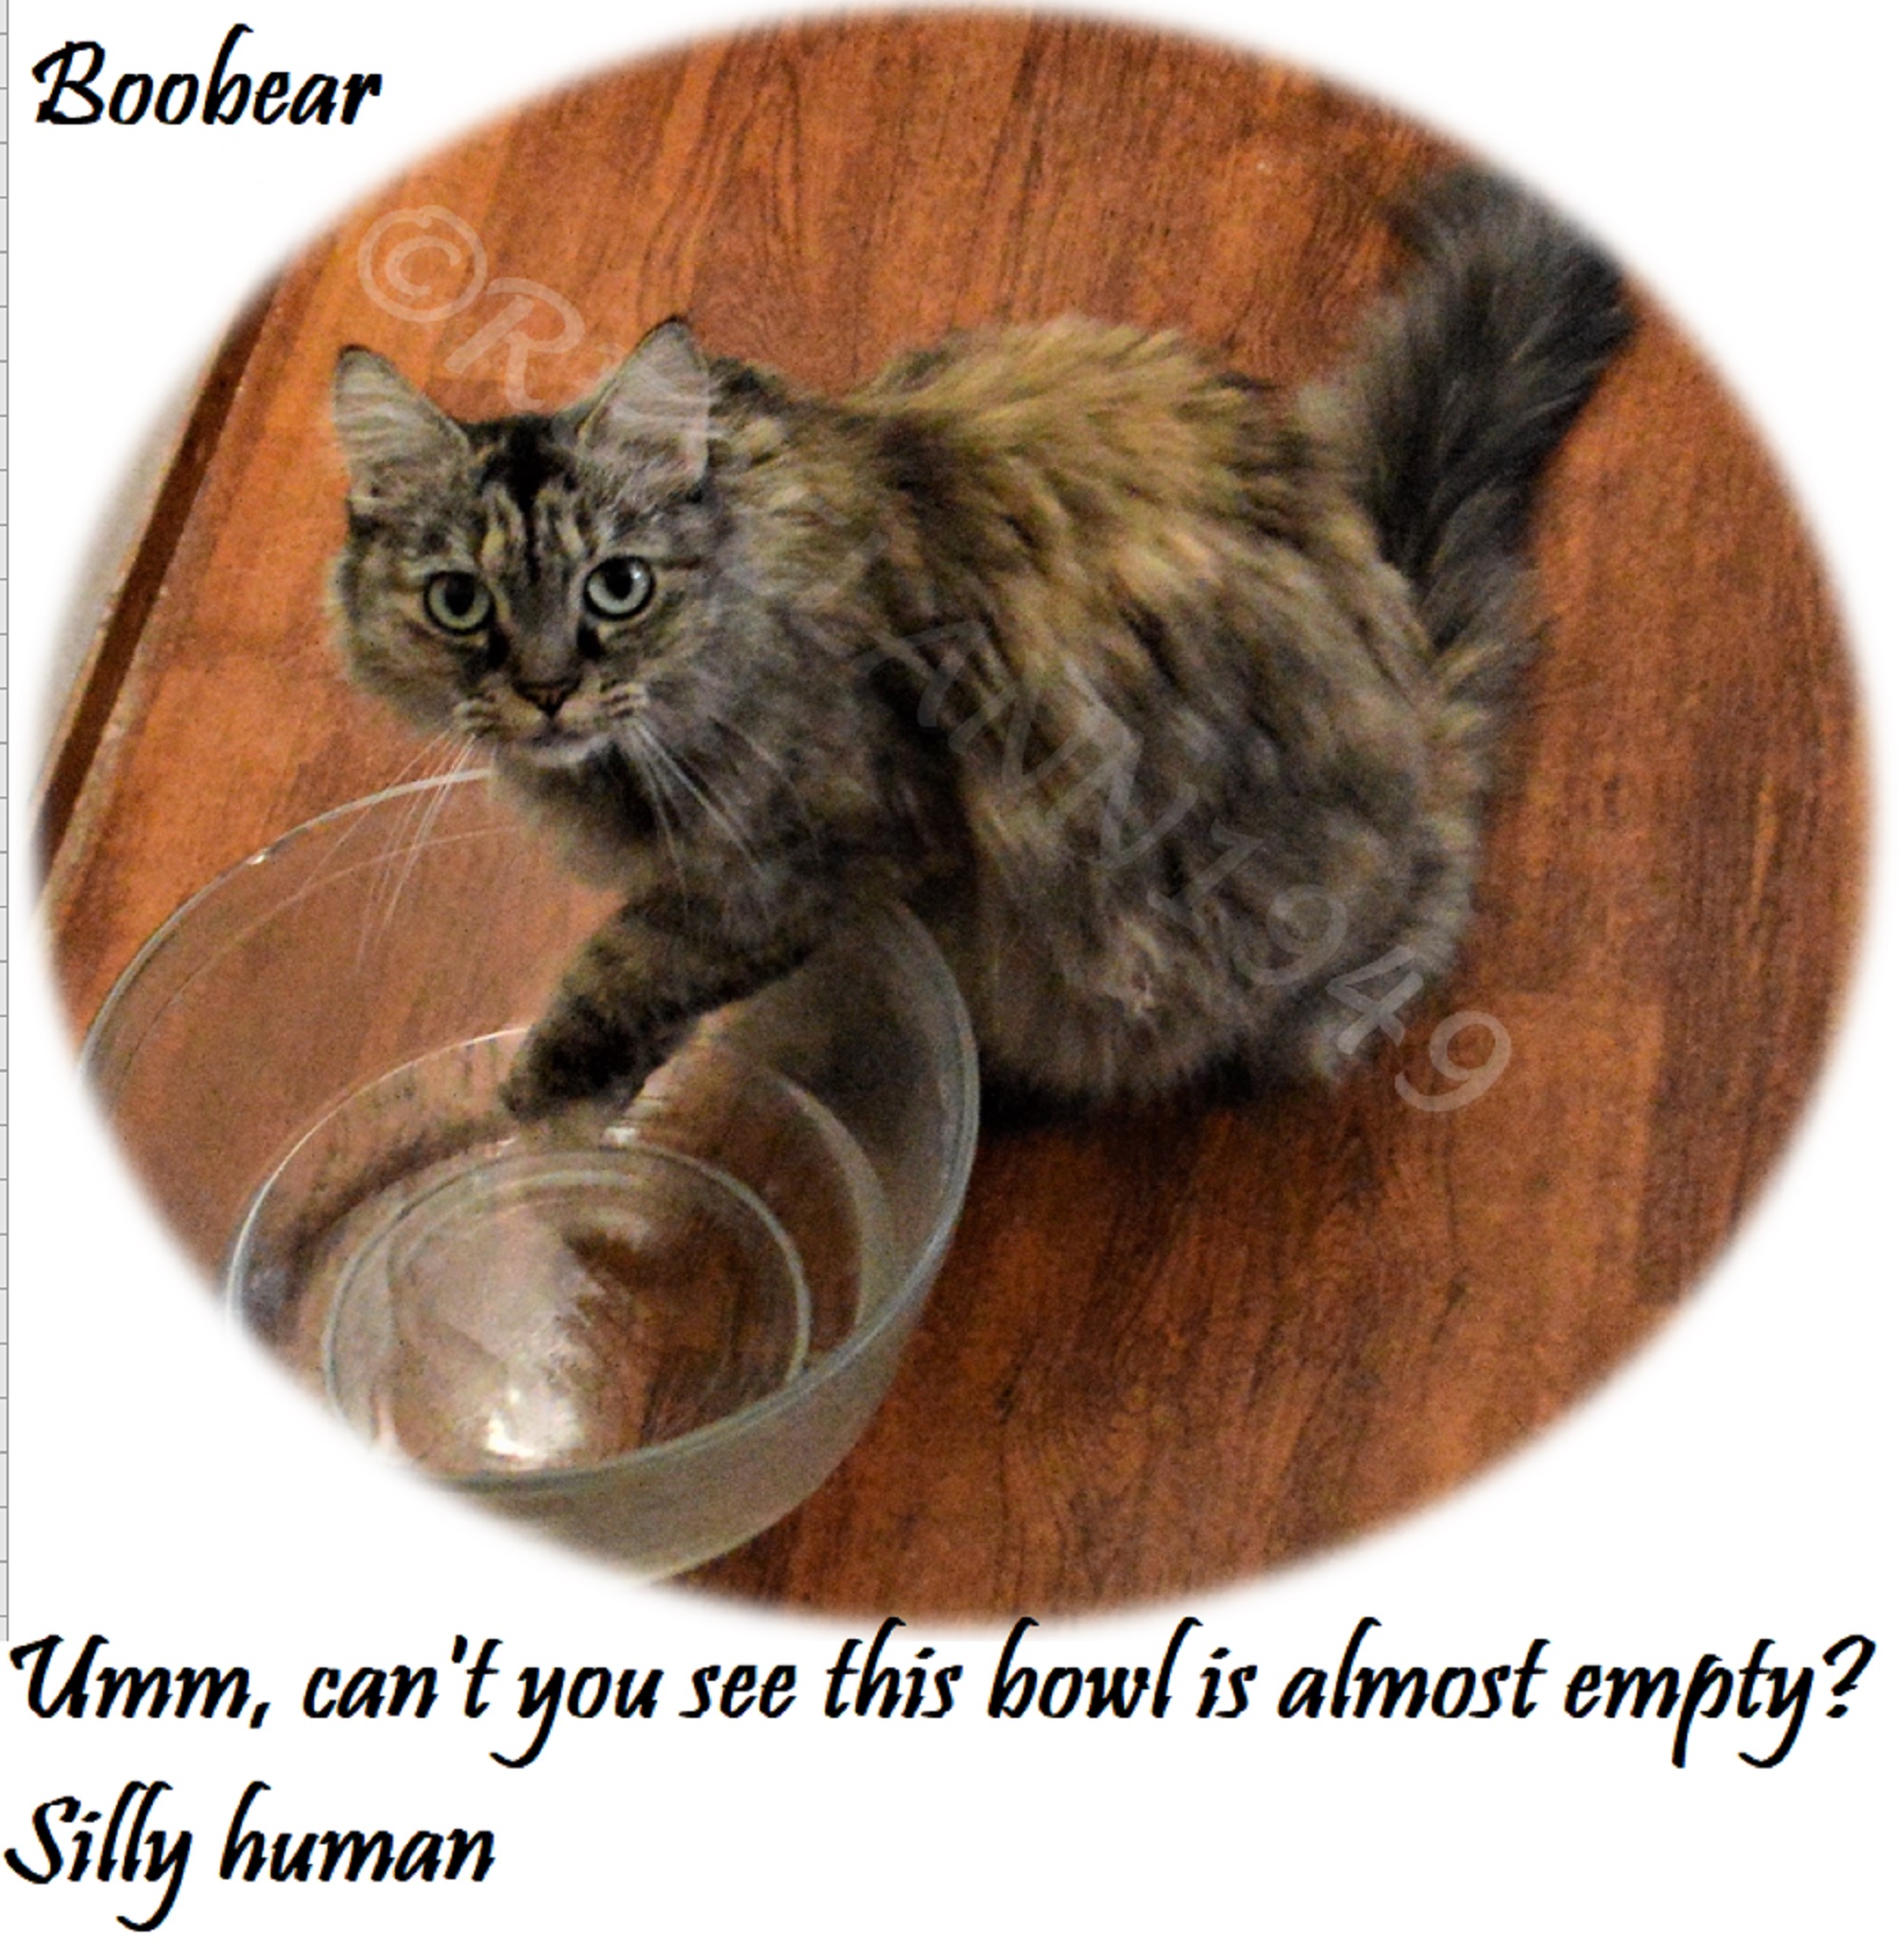 Boobear uses her paw to drink water. I took this shot on Aug 10, 2016